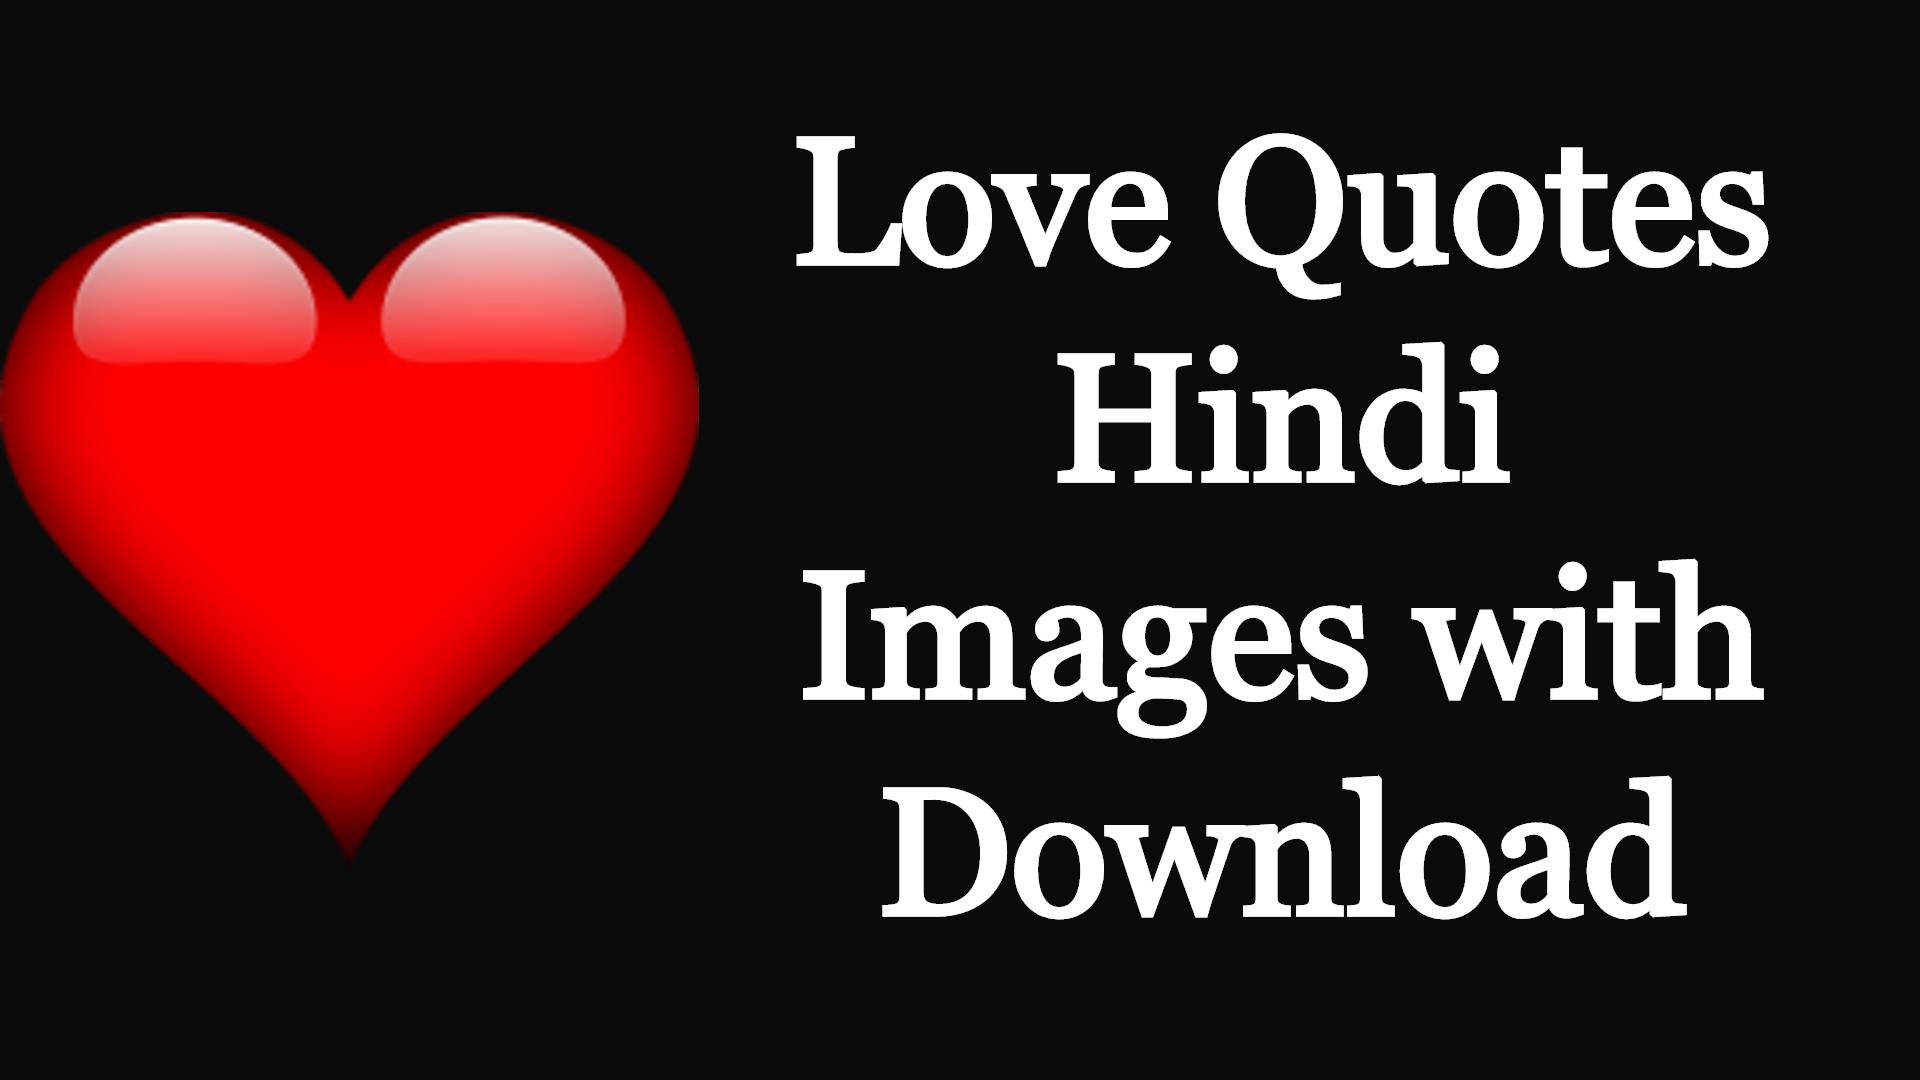 Love Quotes Hindi Images with Download